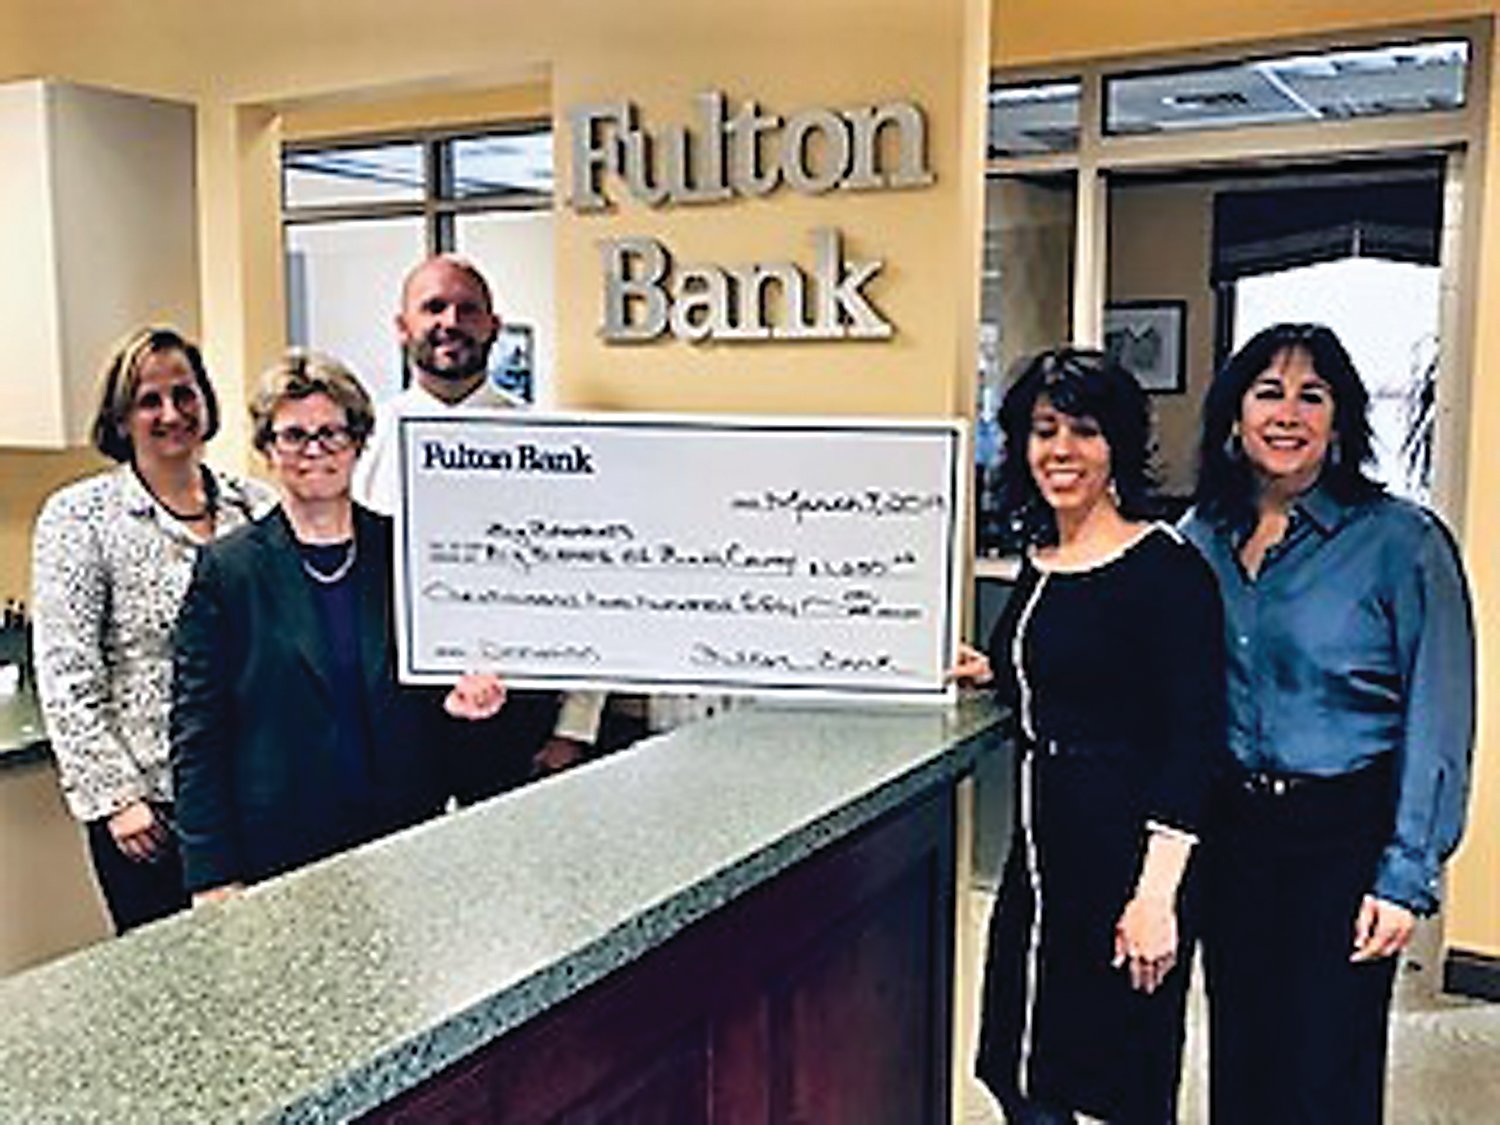 From left are: Sue Lonergan, regional president, Southeastern Pennsylvania; Suzanne Hartshorne, vice president, senior relationship manager; and Louis Lombardi, senior vice president, commercial market executive of Fulton Bank; Rachel Kurtz, owner of RK Abstracts and board member, and Laura Jones, director of development, Big Brothers Big Sisters of Bucks County.